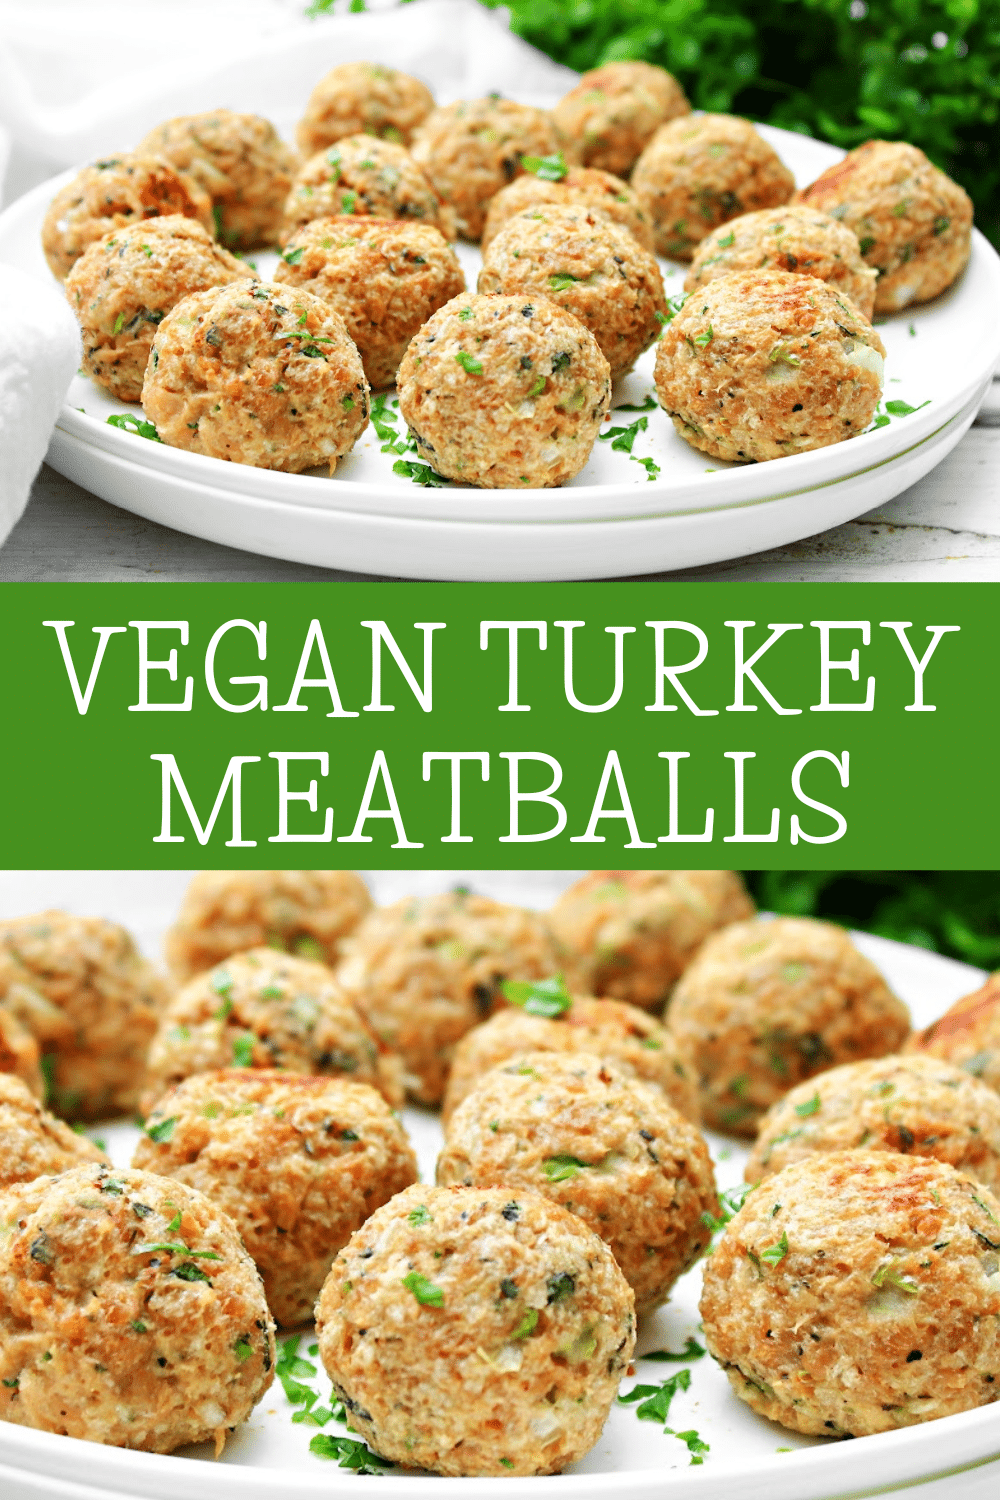 Vegan Turkey Meatballs ~Plant-based ground turkey meatballs that are perfectly seasoned for the holidays and ready in 30 minutes! via @thiswifecooks